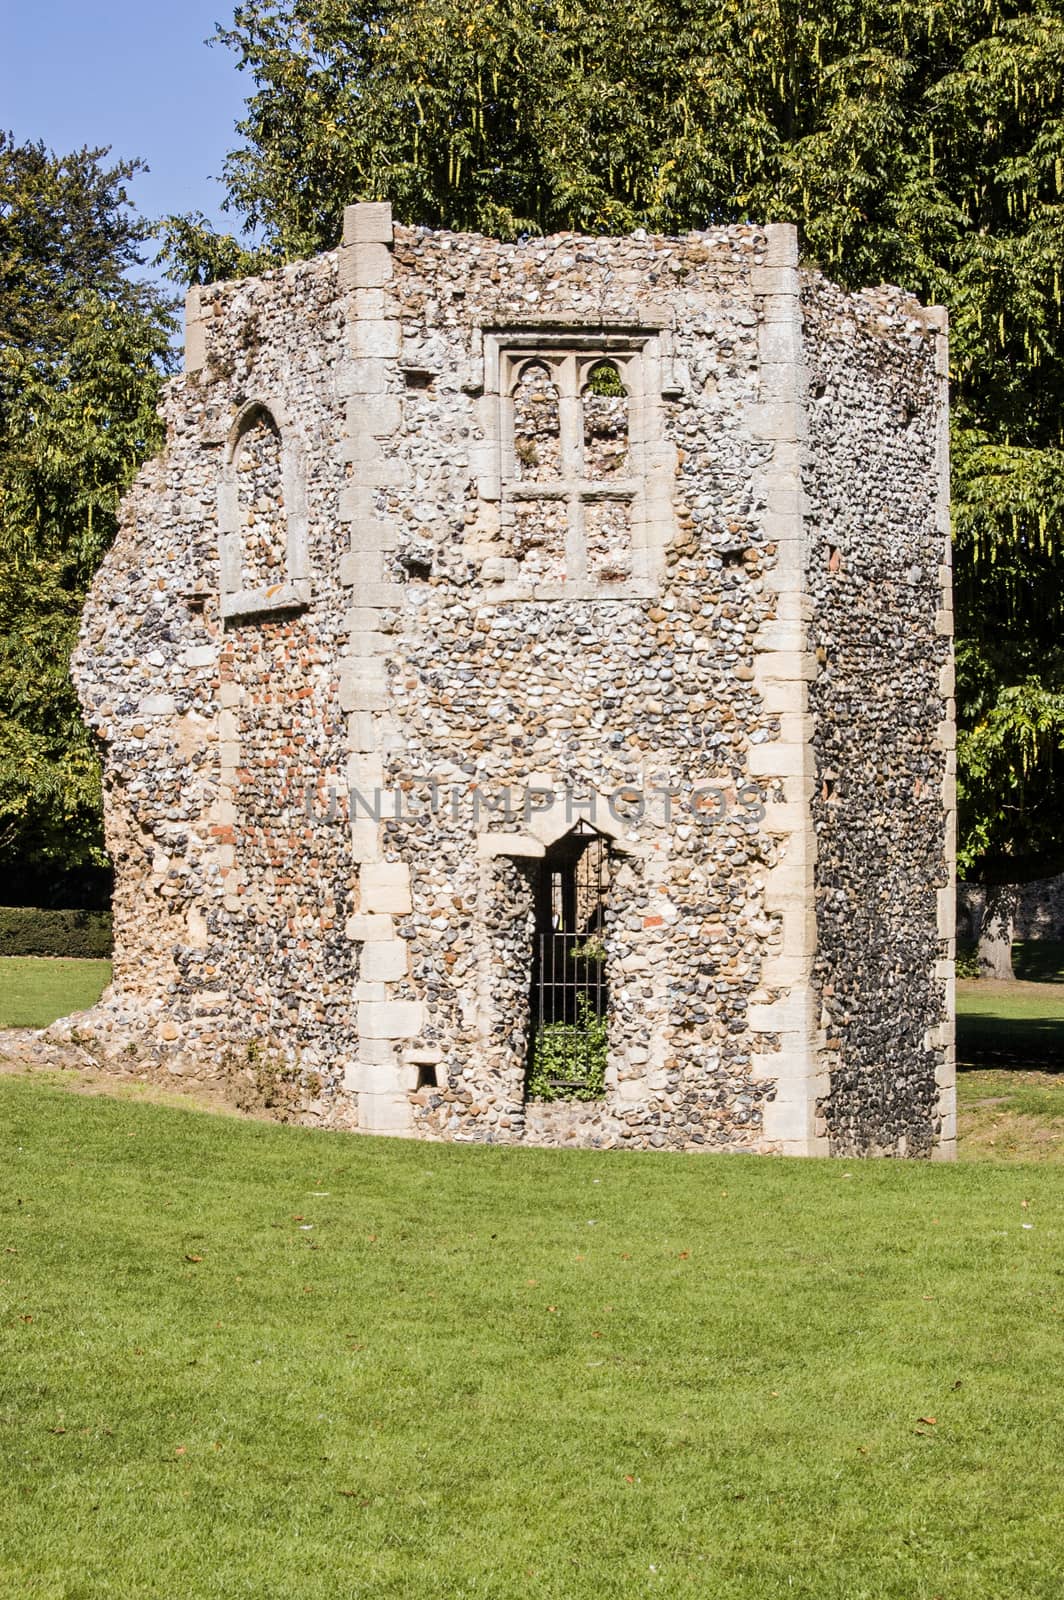 Ruined Dovecote, Bury St Edmunds, Suffolk by BasPhoto